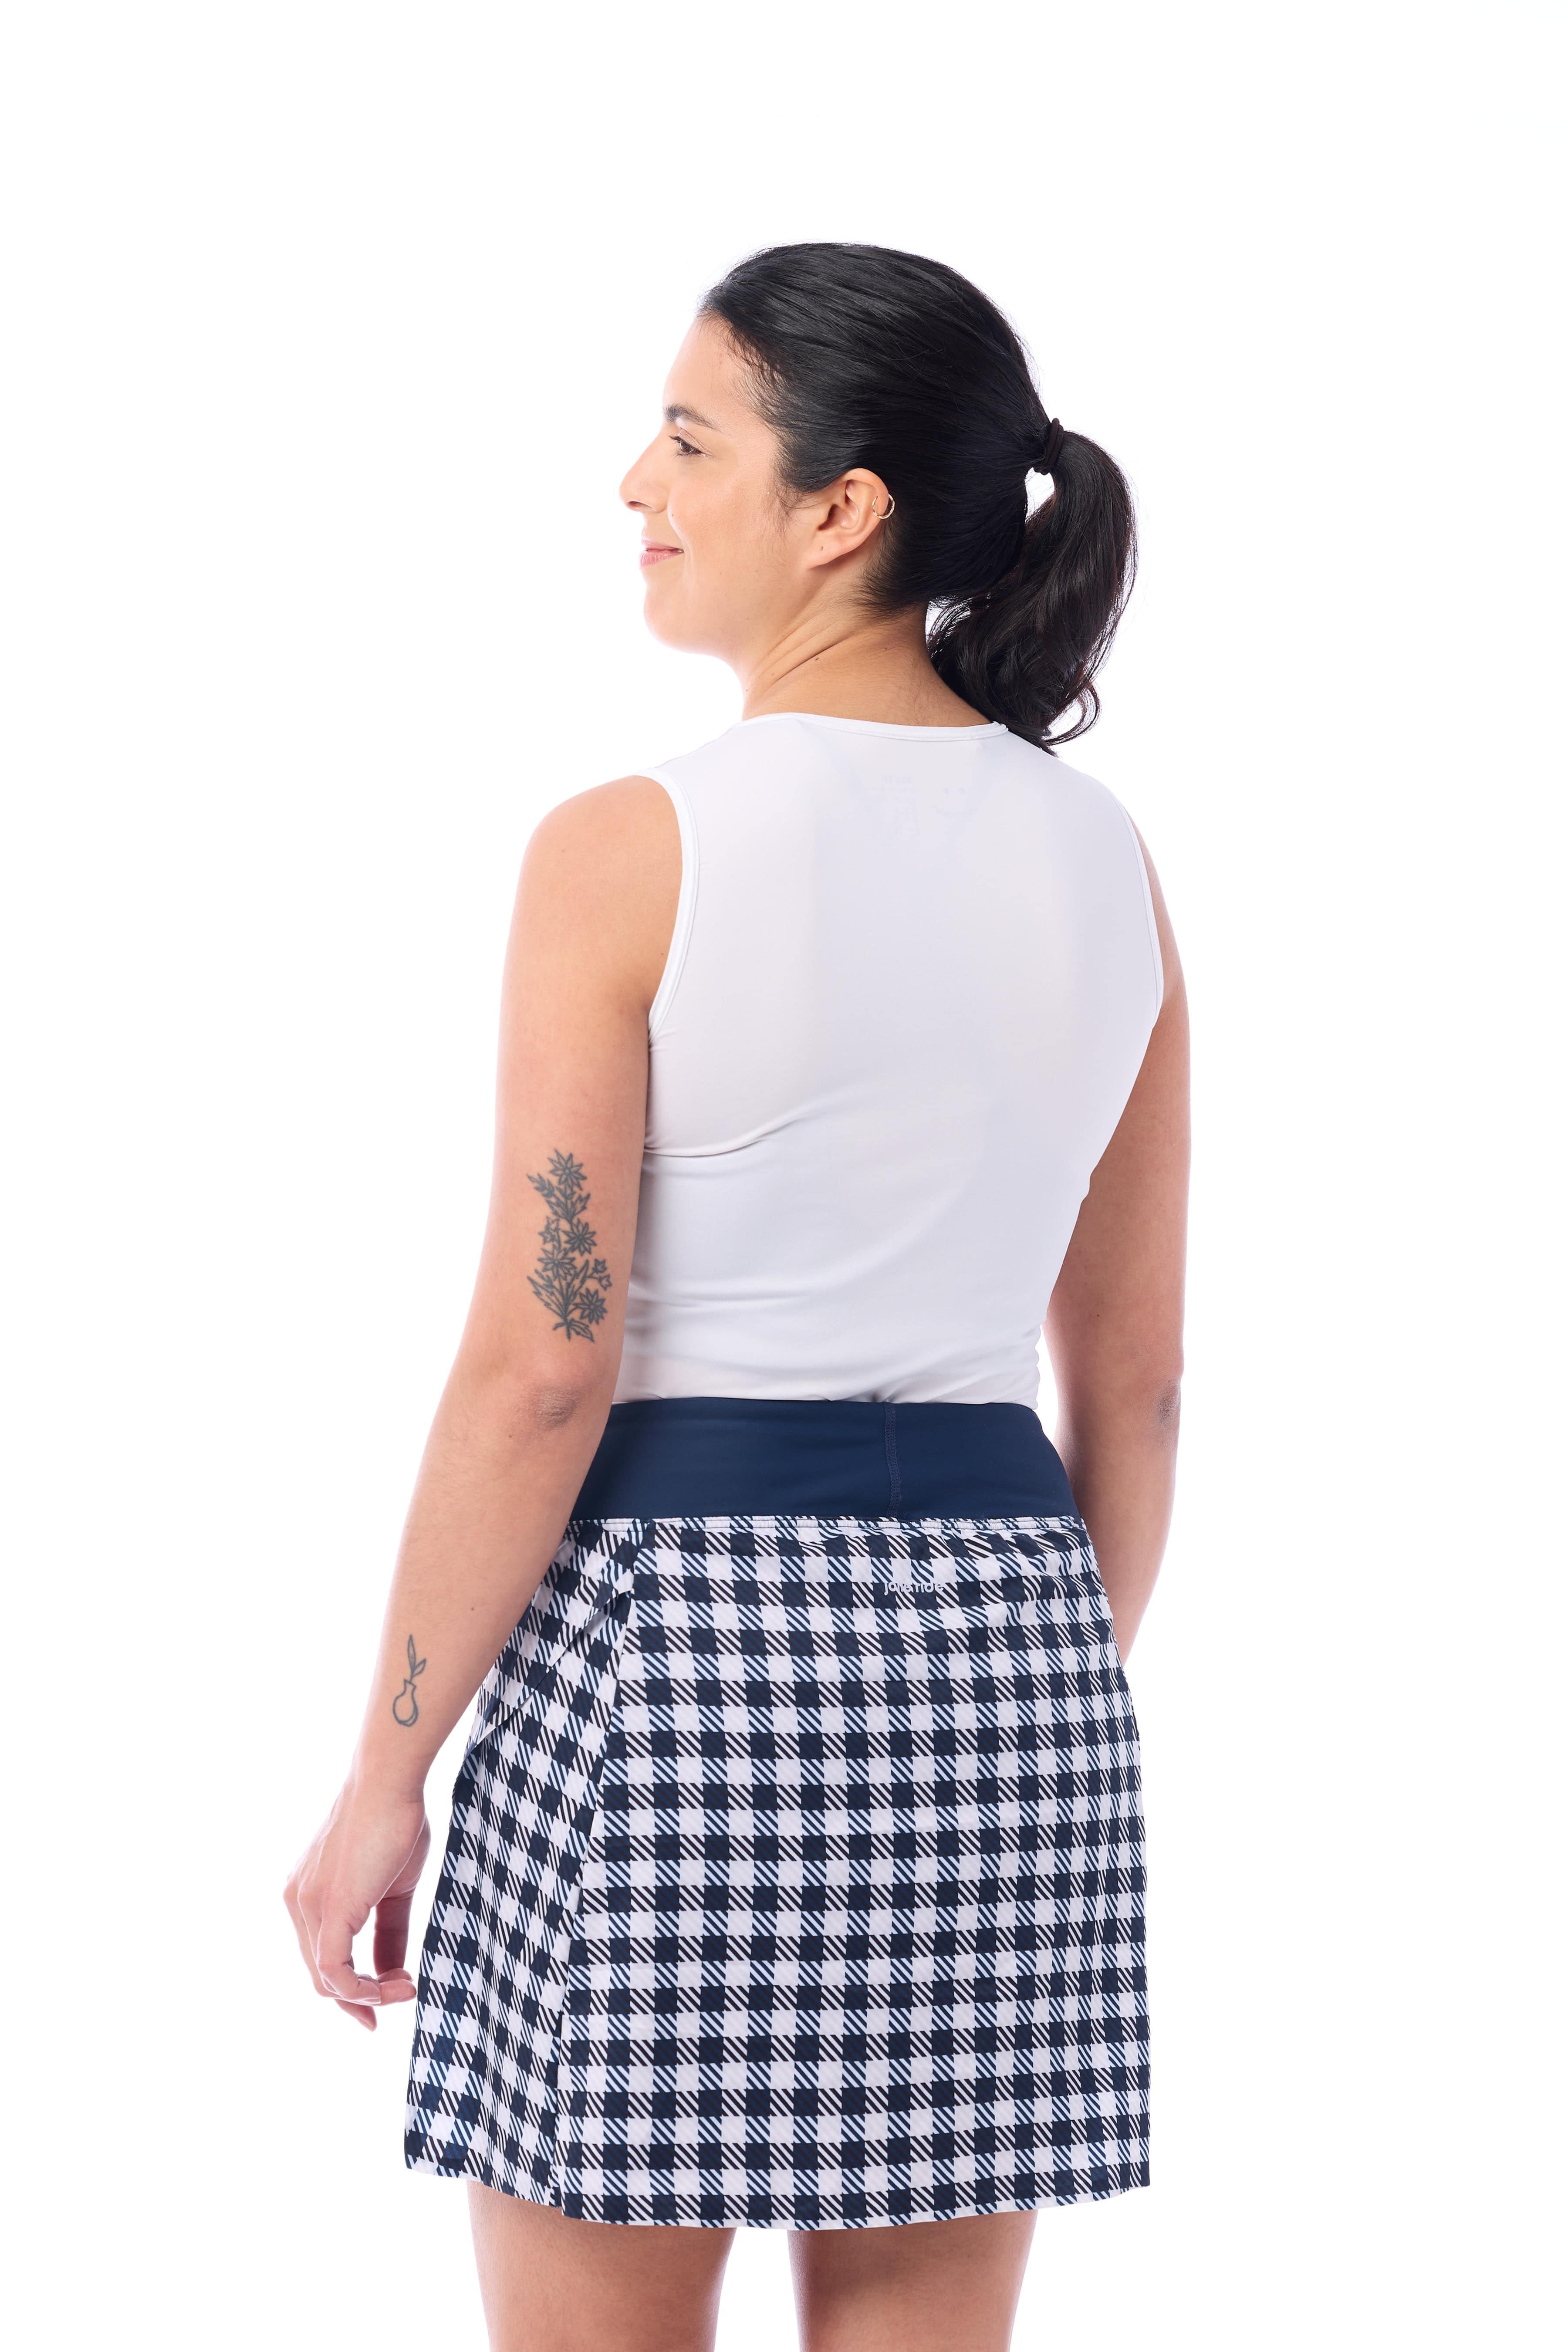 JolieRide Skirt cycling skirt with cycling shorts and 50+ UV protection